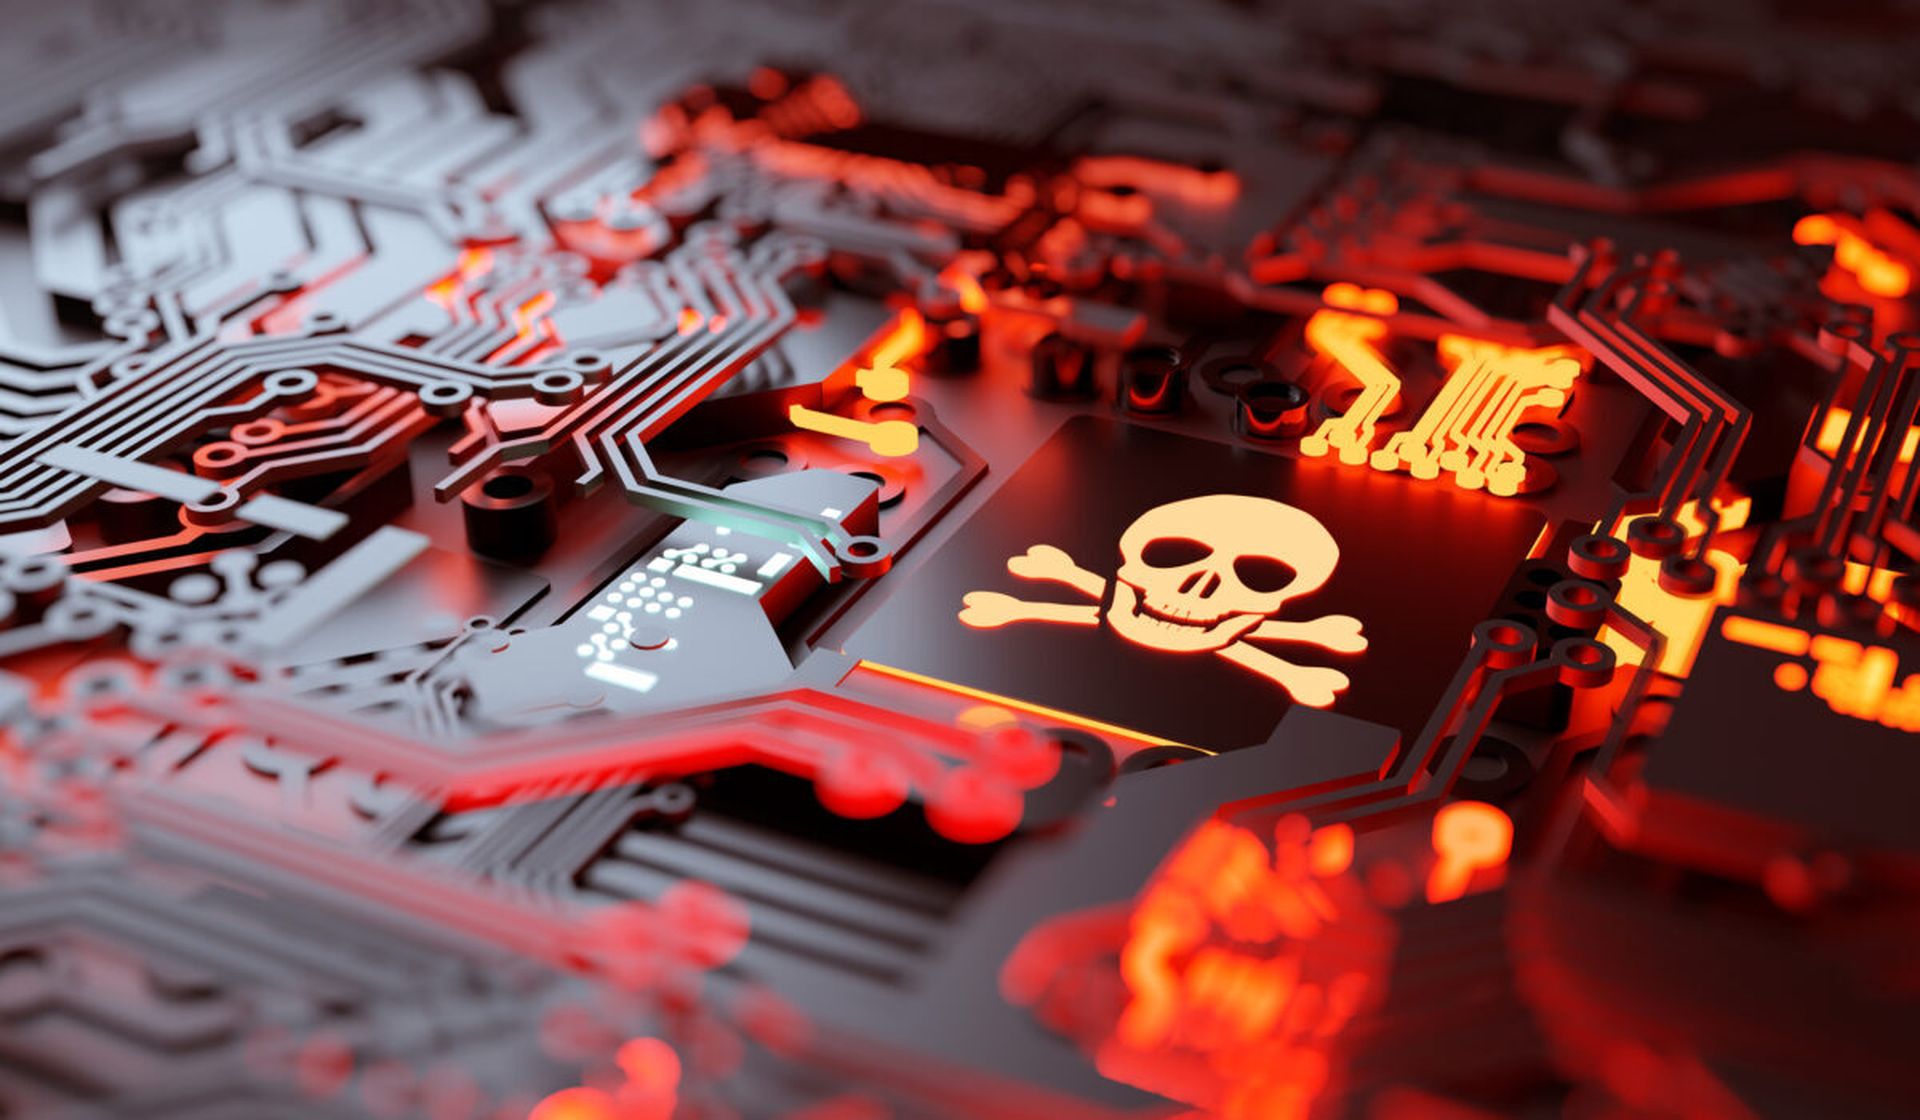 Black Basta, an emerging ransomware-as-a-service group that has wrought havoc across industry and critical infrastructure sectors over the past year, likely shares tooling and perhaps personnel with the notorious FIN7 hacking group, according to SentinelOne researchers. (Image credit: solarseven via Getty)